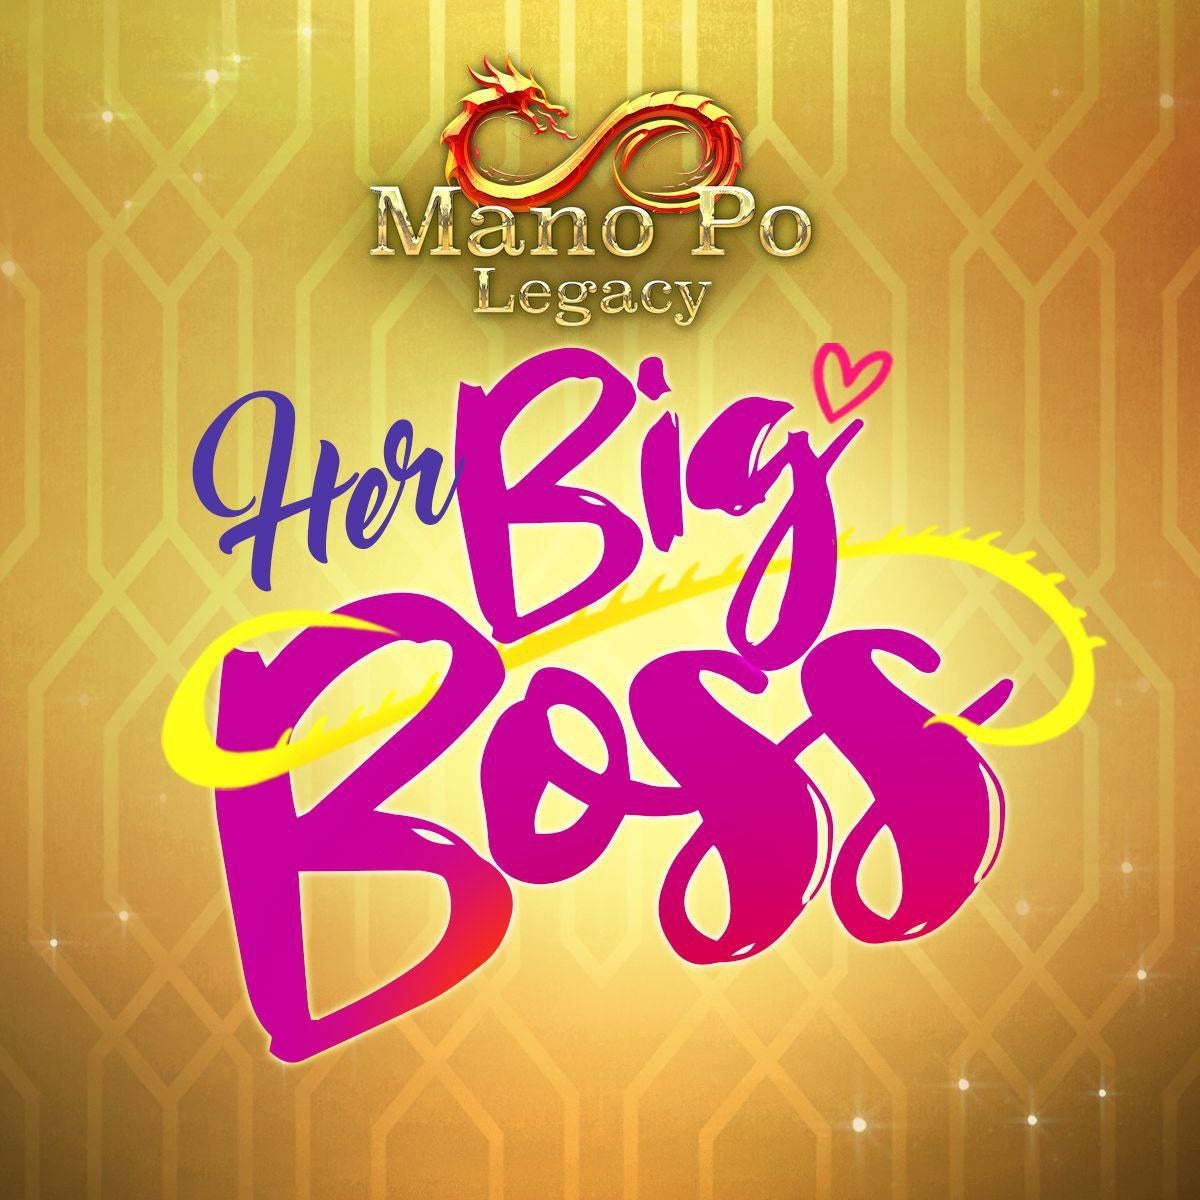 TV ratings for Mano Po Legacy: Her Big Boss in Ireland. GMA TV series